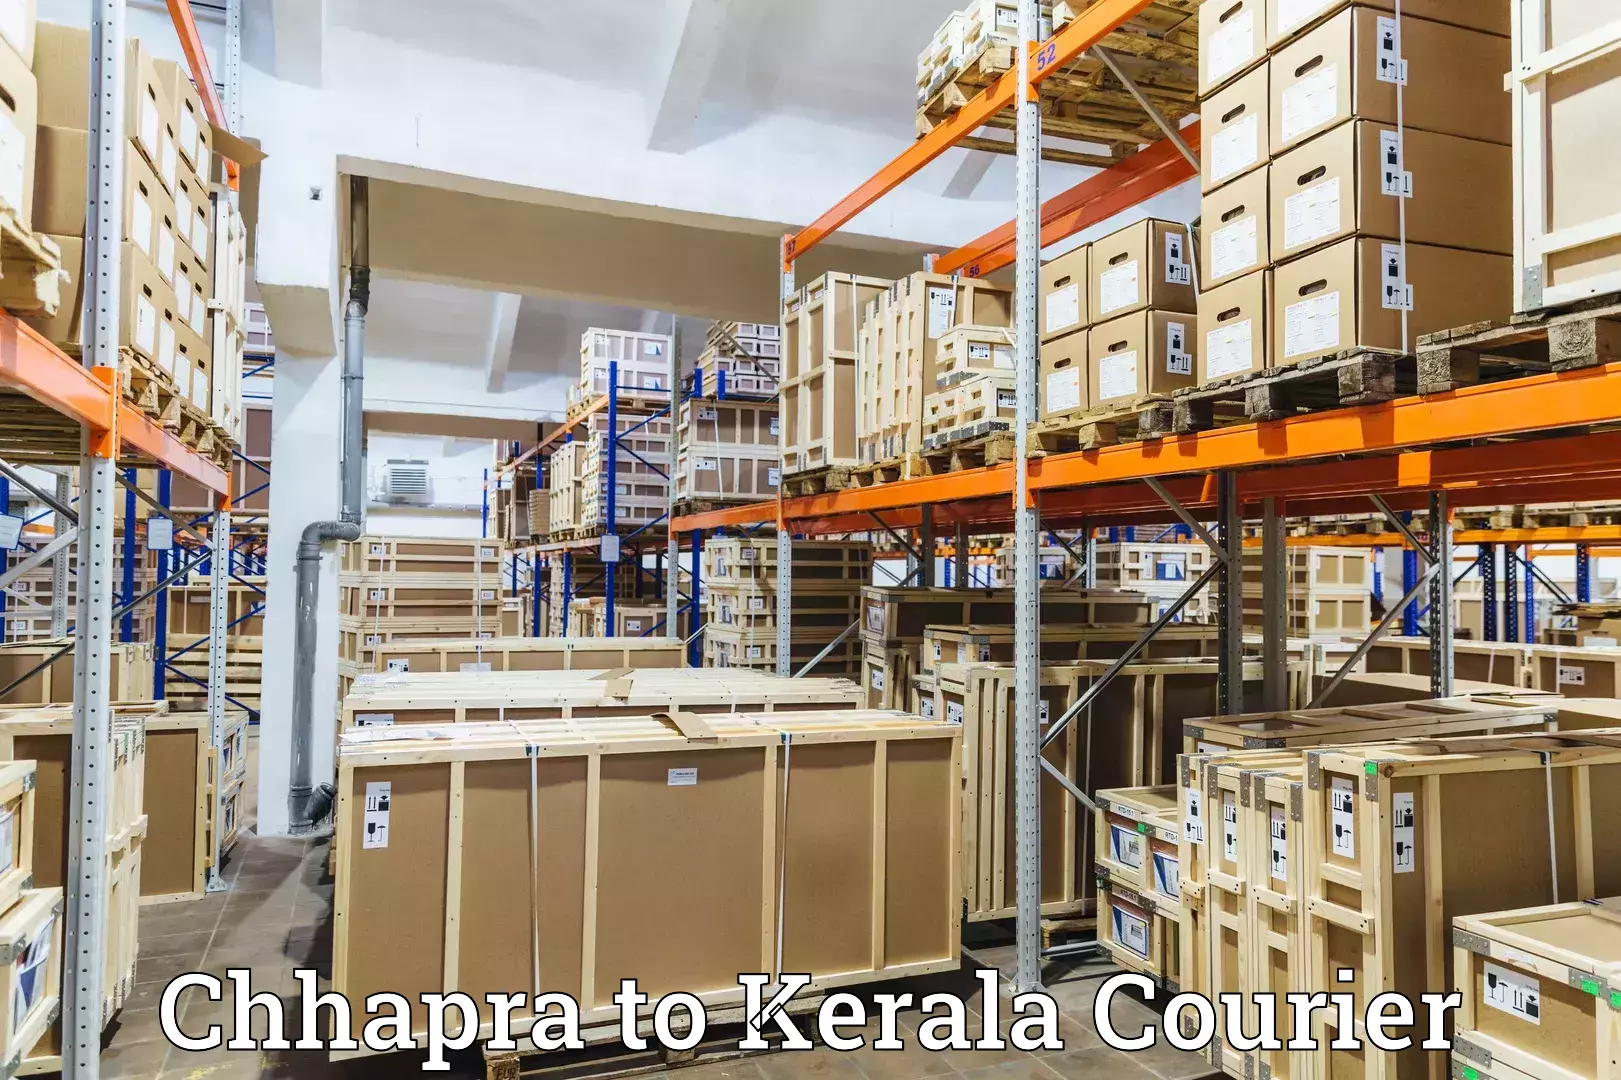 Digital shipping tools in Chhapra to Valanchery